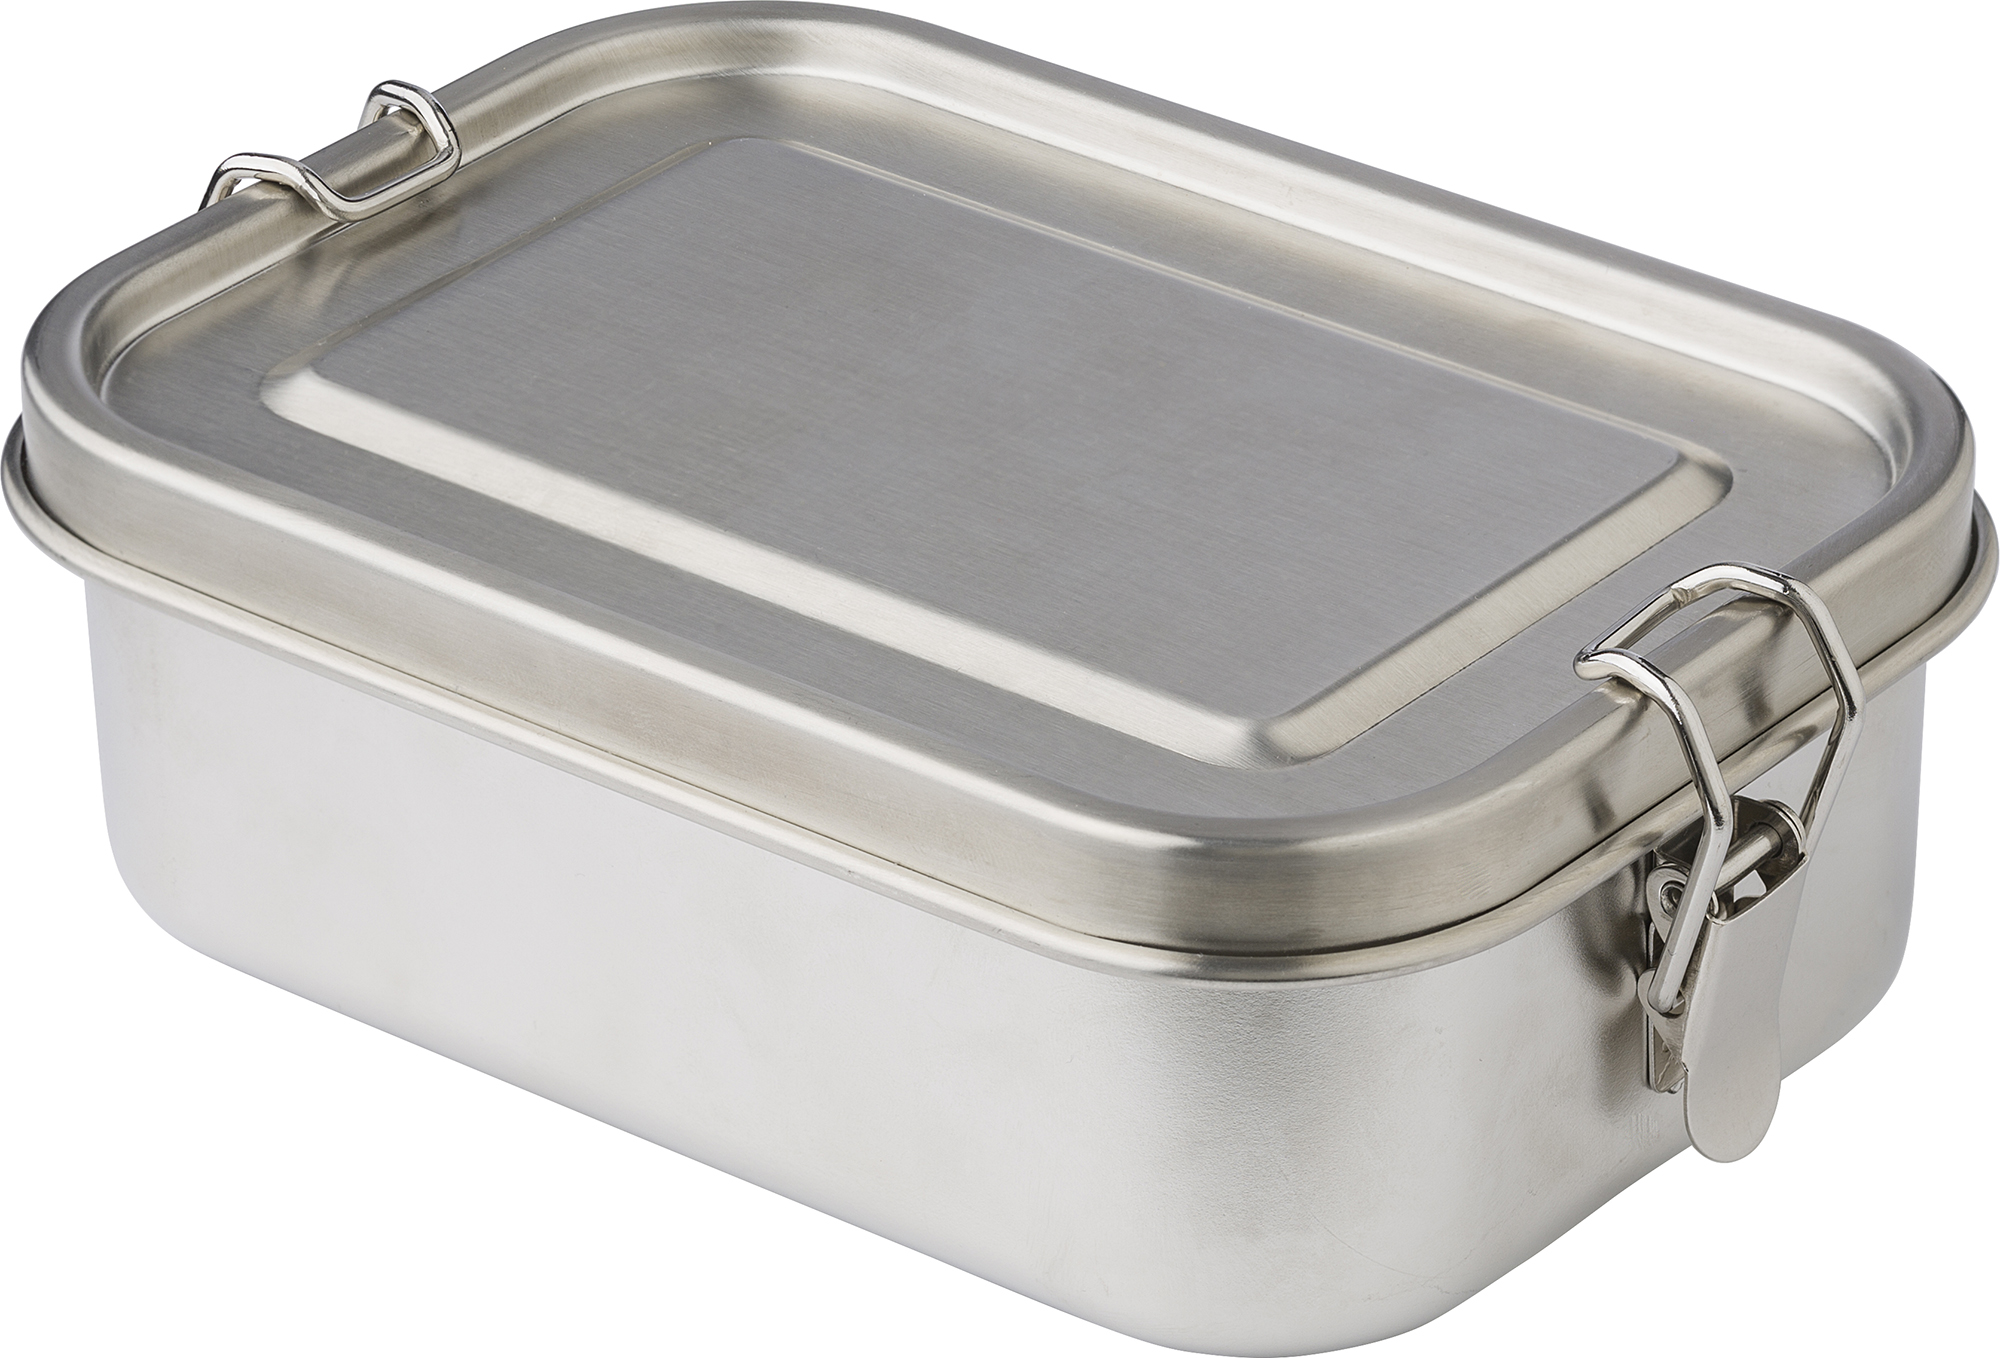 000000966198 032999999 3d045 rgt pro01 2023 fal - Stainless steel lunch box